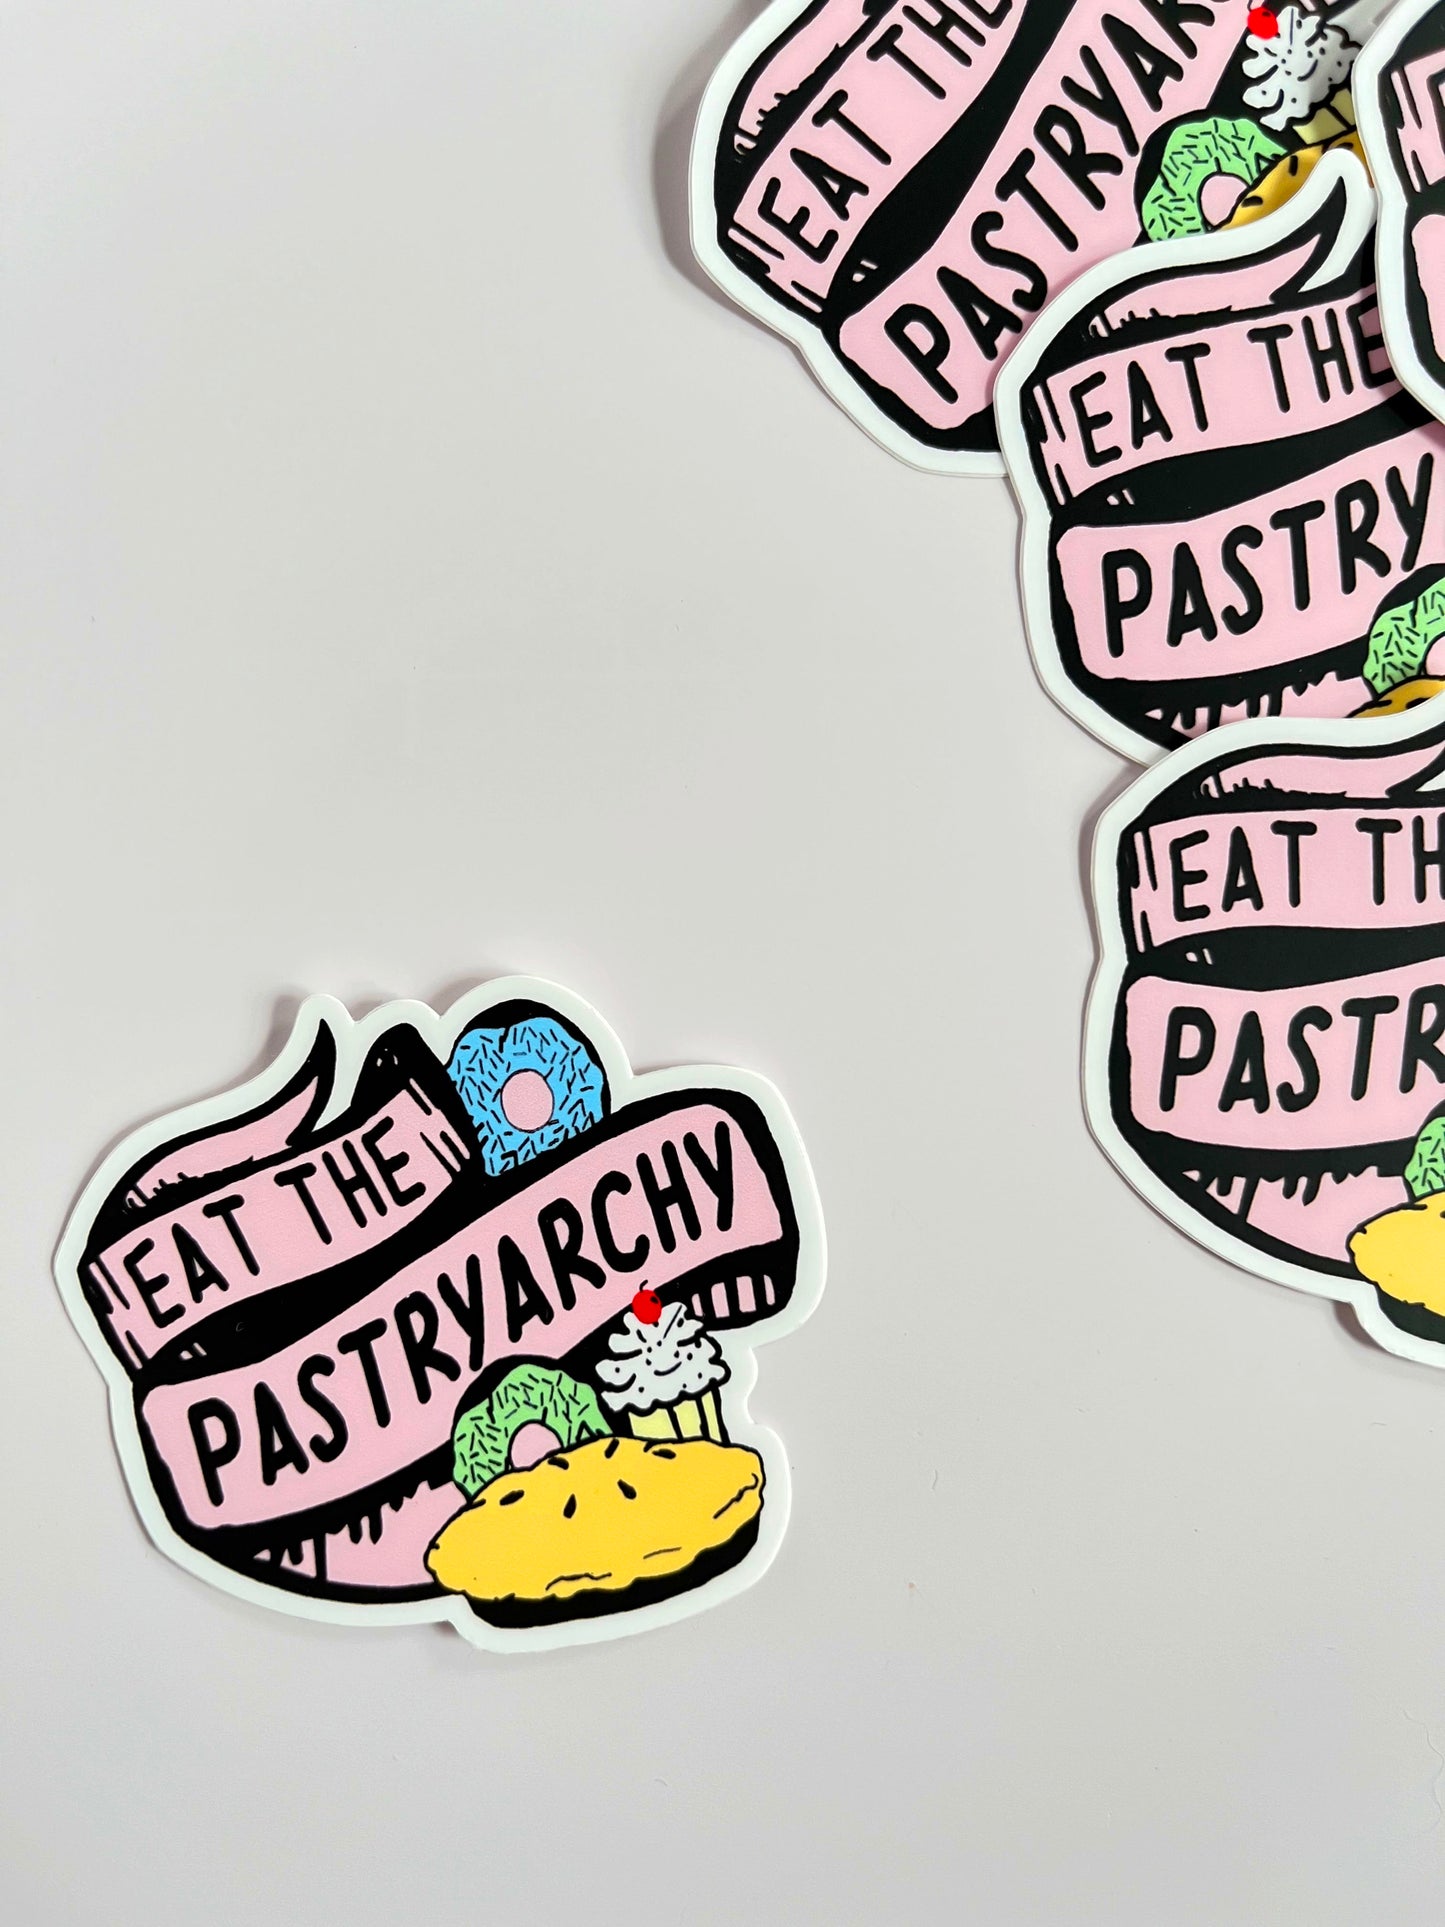 sticker eat the pastryarchy feminist humor down with the patriarchy pie donuts cupcakes fun decal funny stickers coin laundry pink pastry